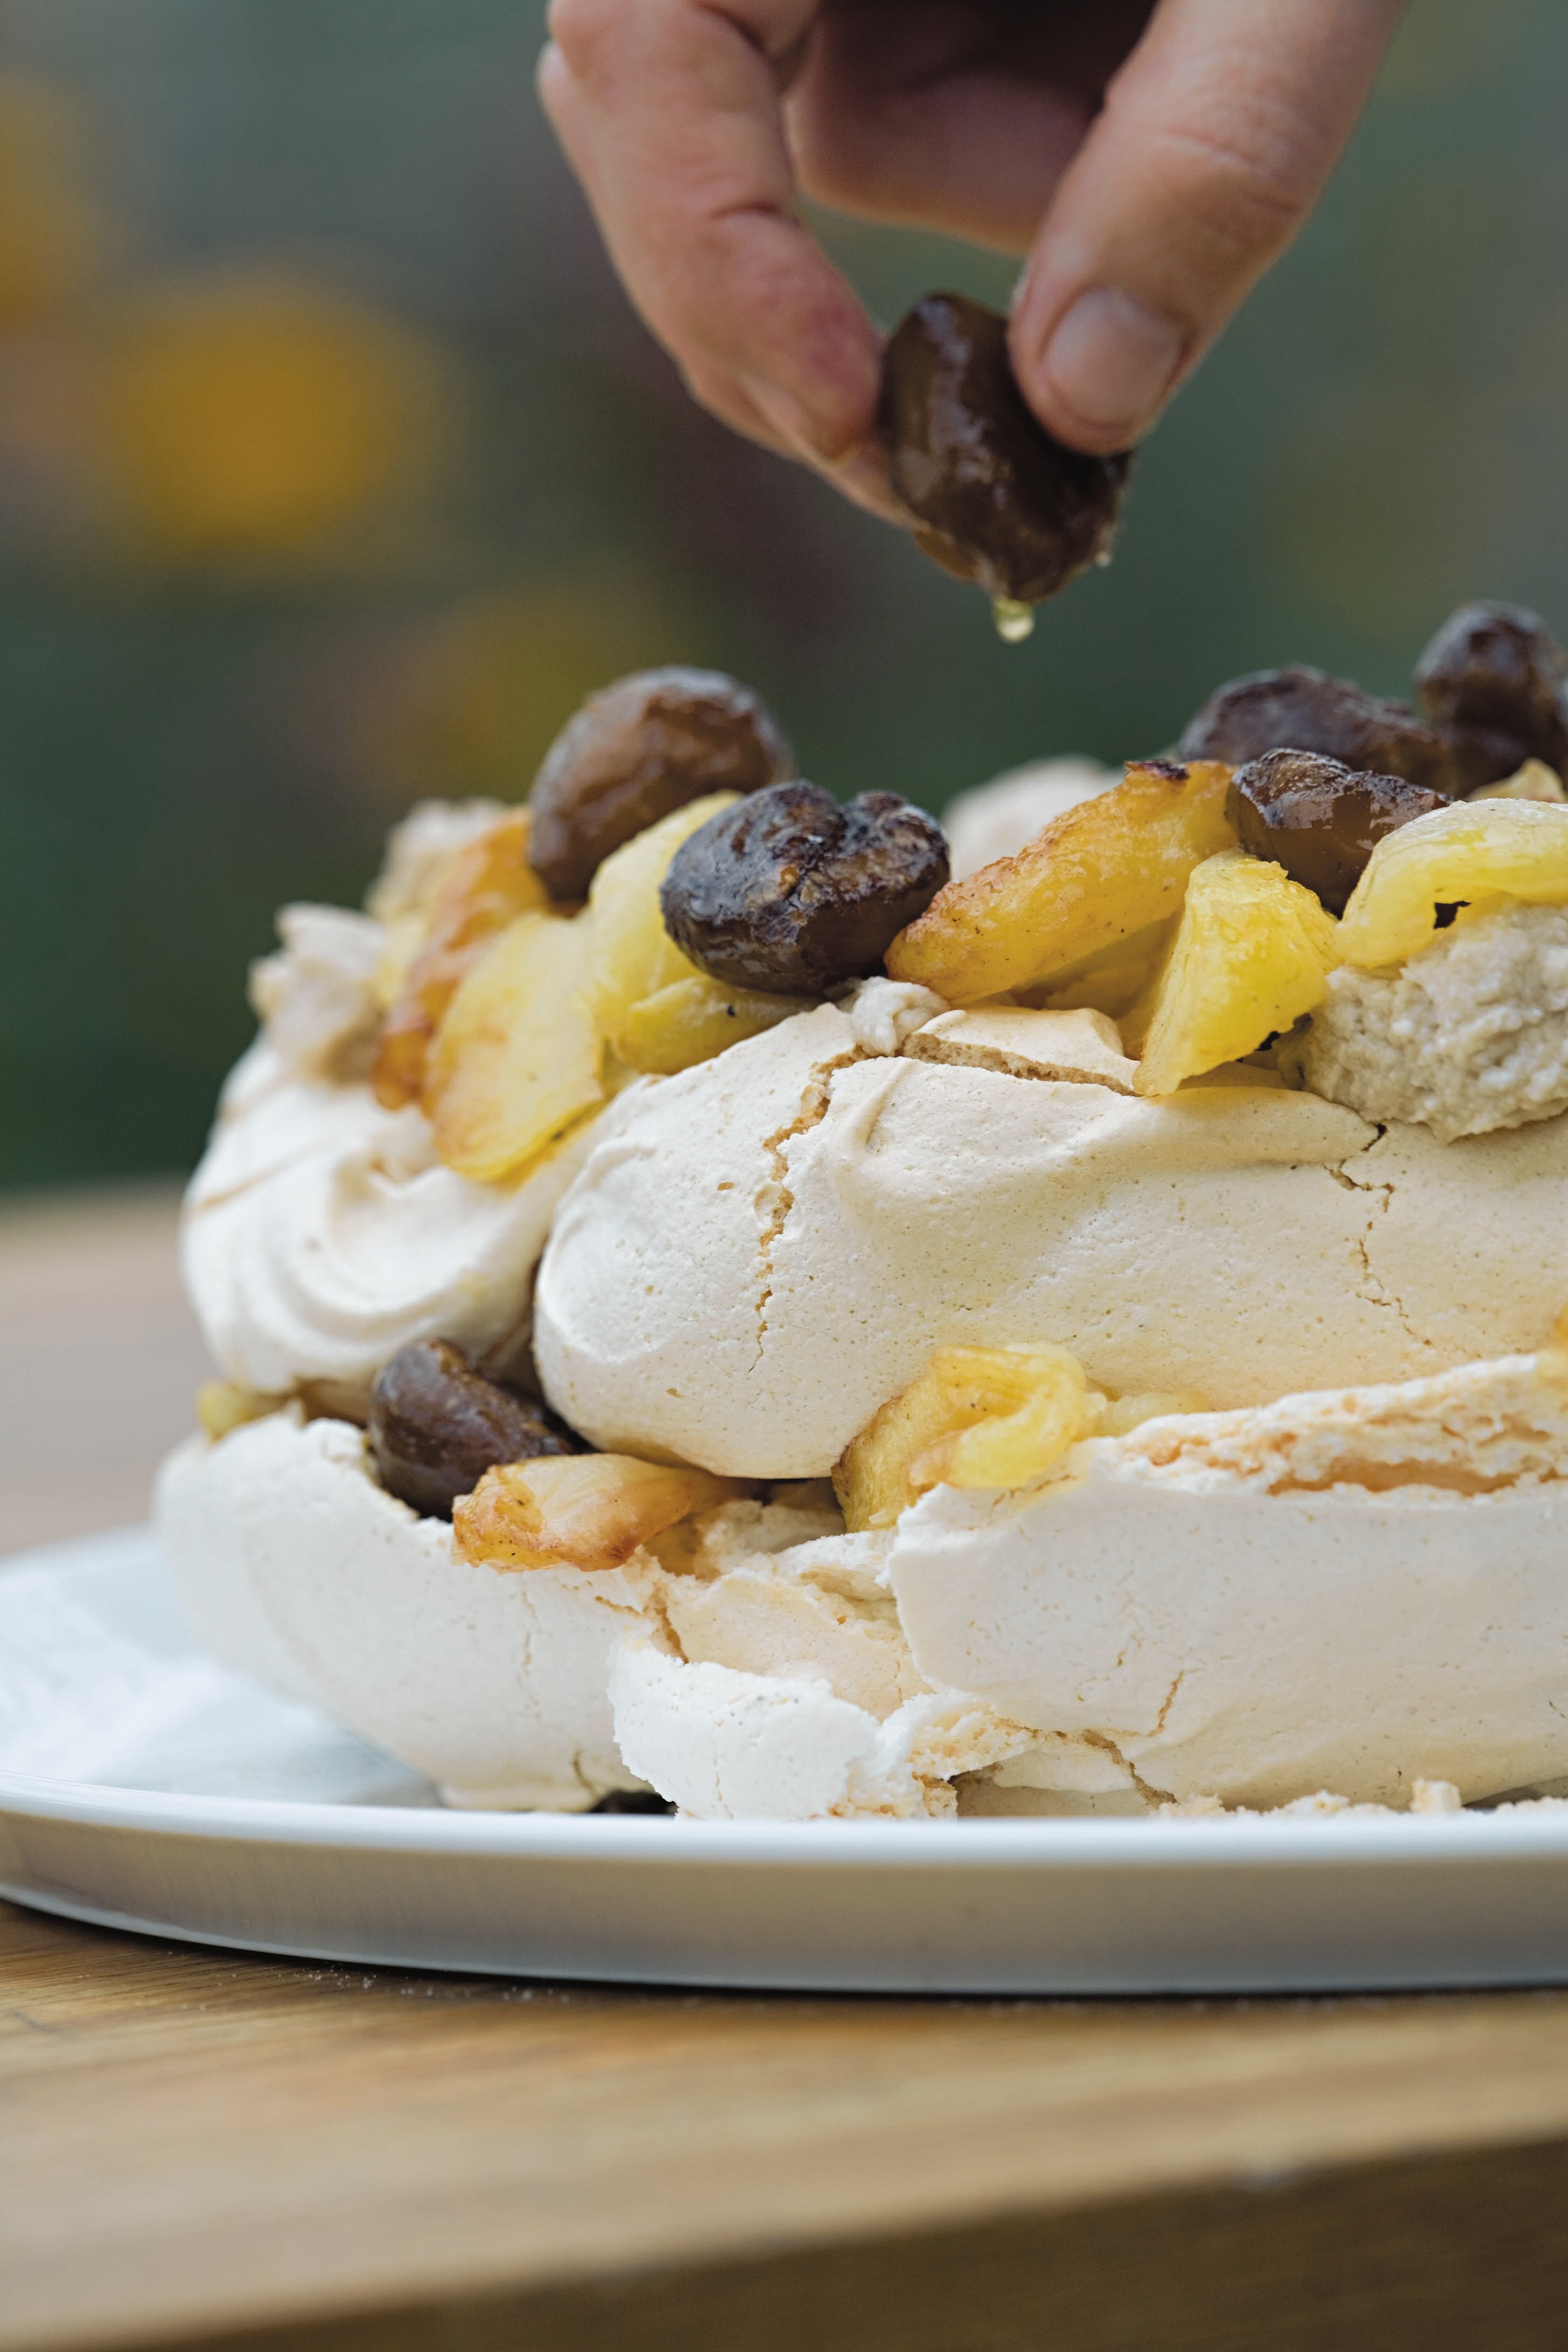 Pavlova is a light and delicious alternative to the stodginess of Christmas pudding